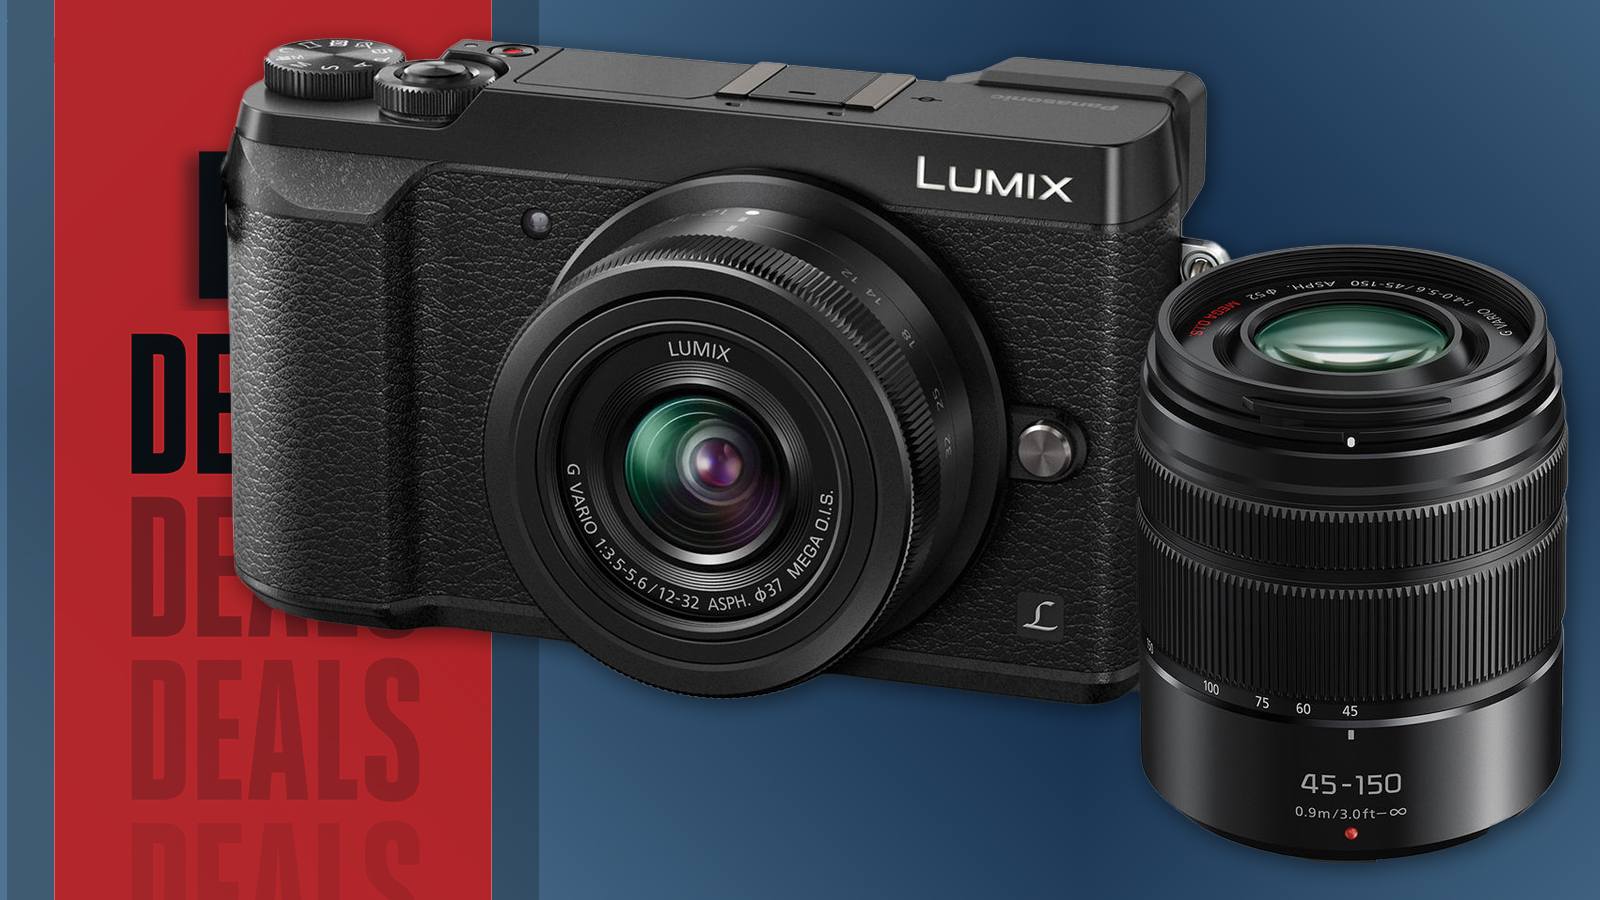 zondaar slinger Experiment Black Friday deal: 40% off this Panasonic Lumix mirrorless camera on sale  for $600 | T3